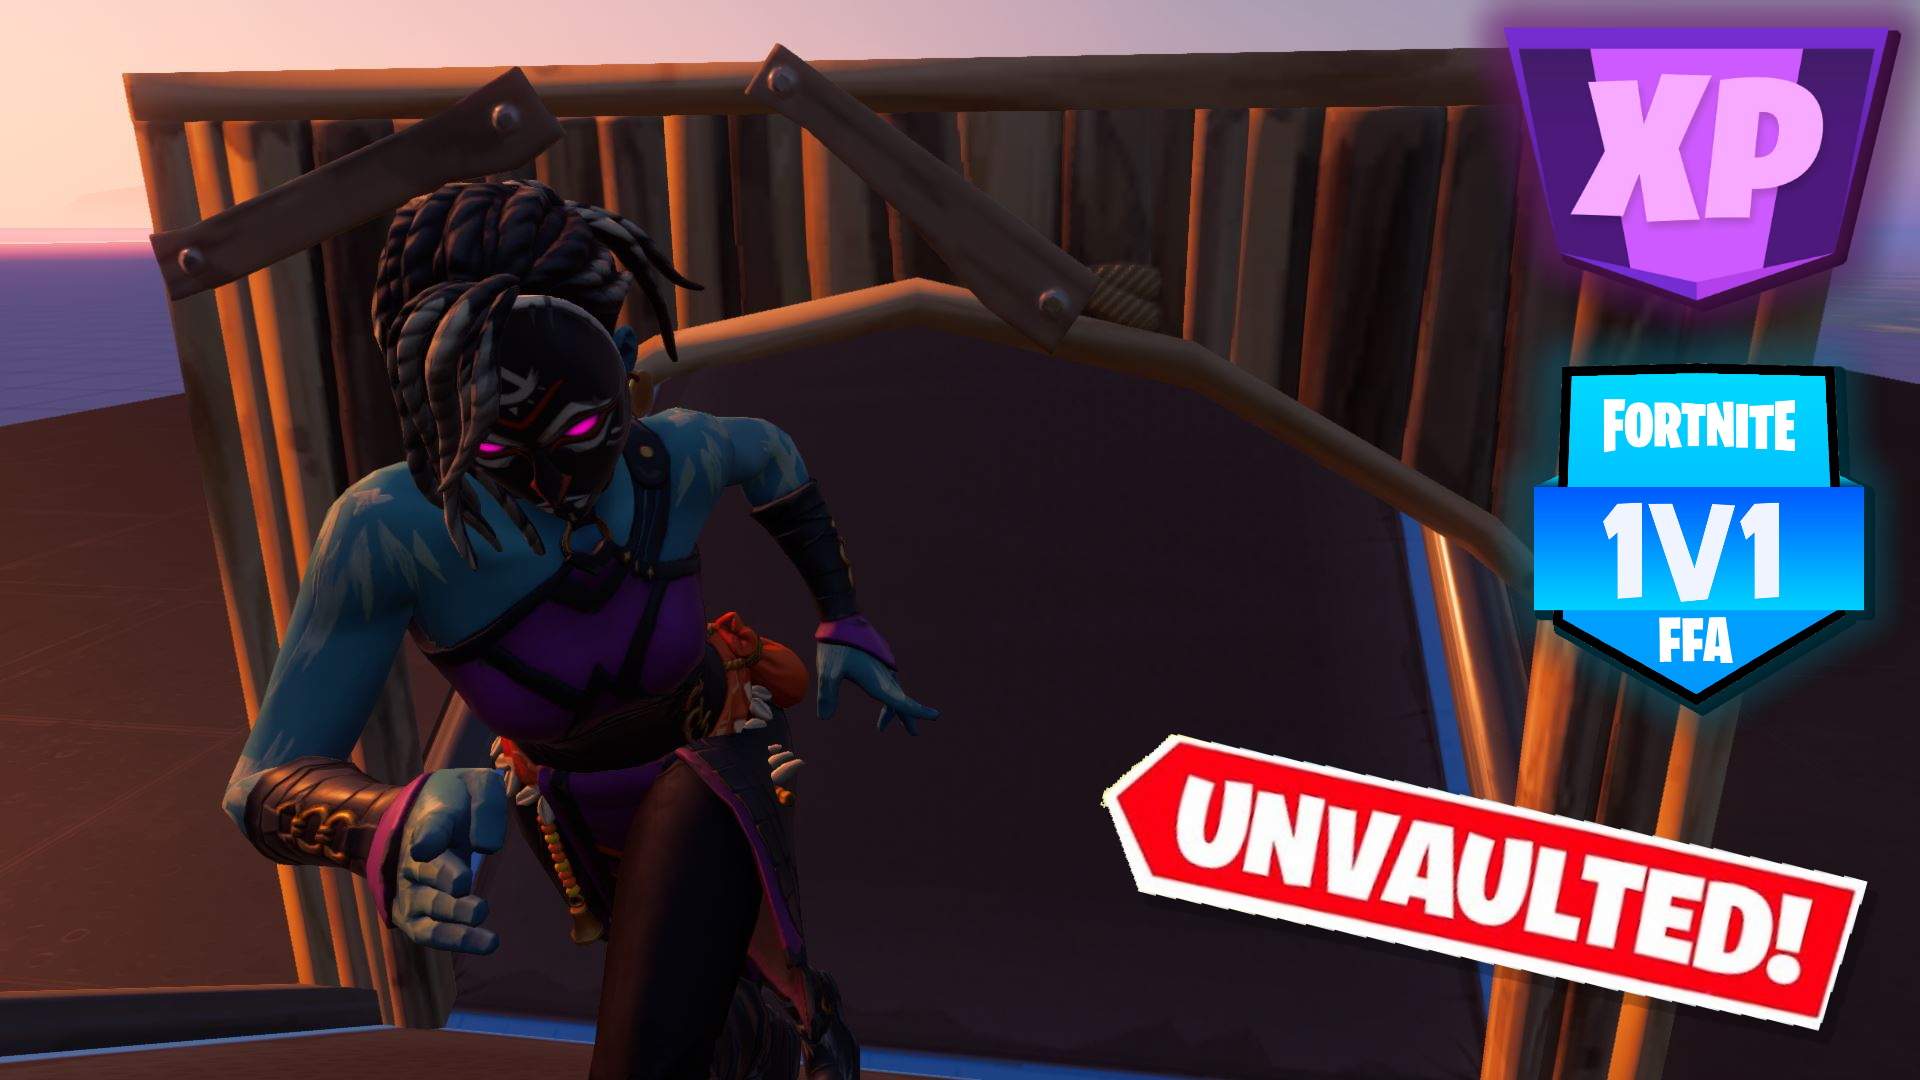 🔓UNVAULTED 1V1 BUILD FIGHTS 💯 ✨XP✨